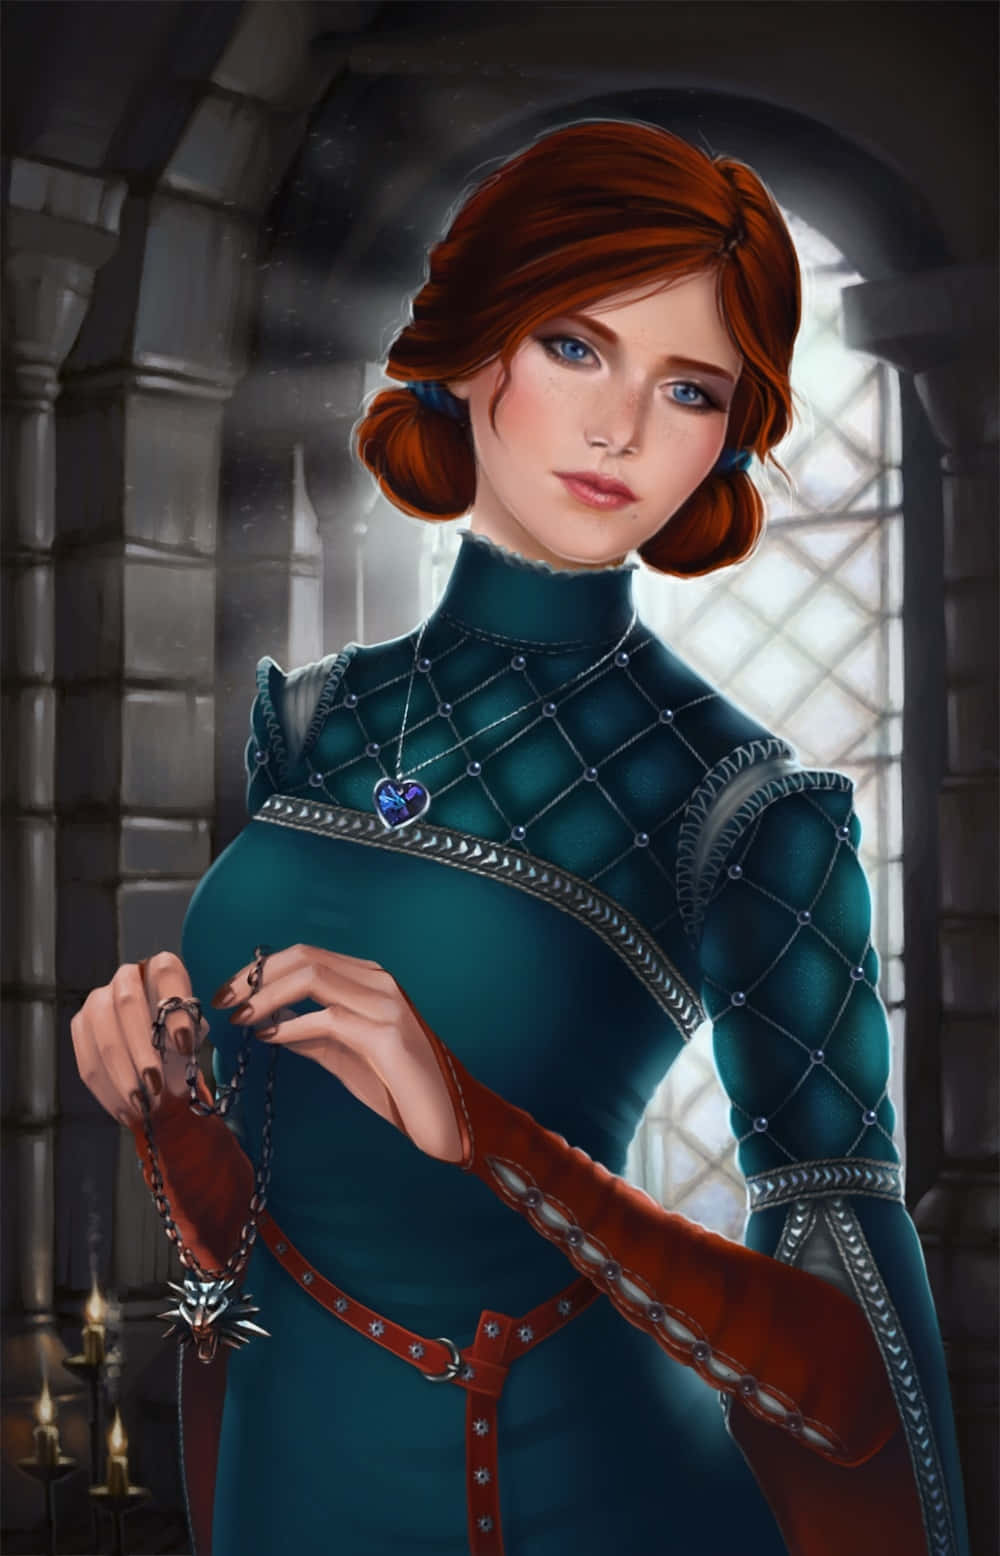 Triss Merigold, The Fearless Sorceress From The Witcher Series Wallpaper